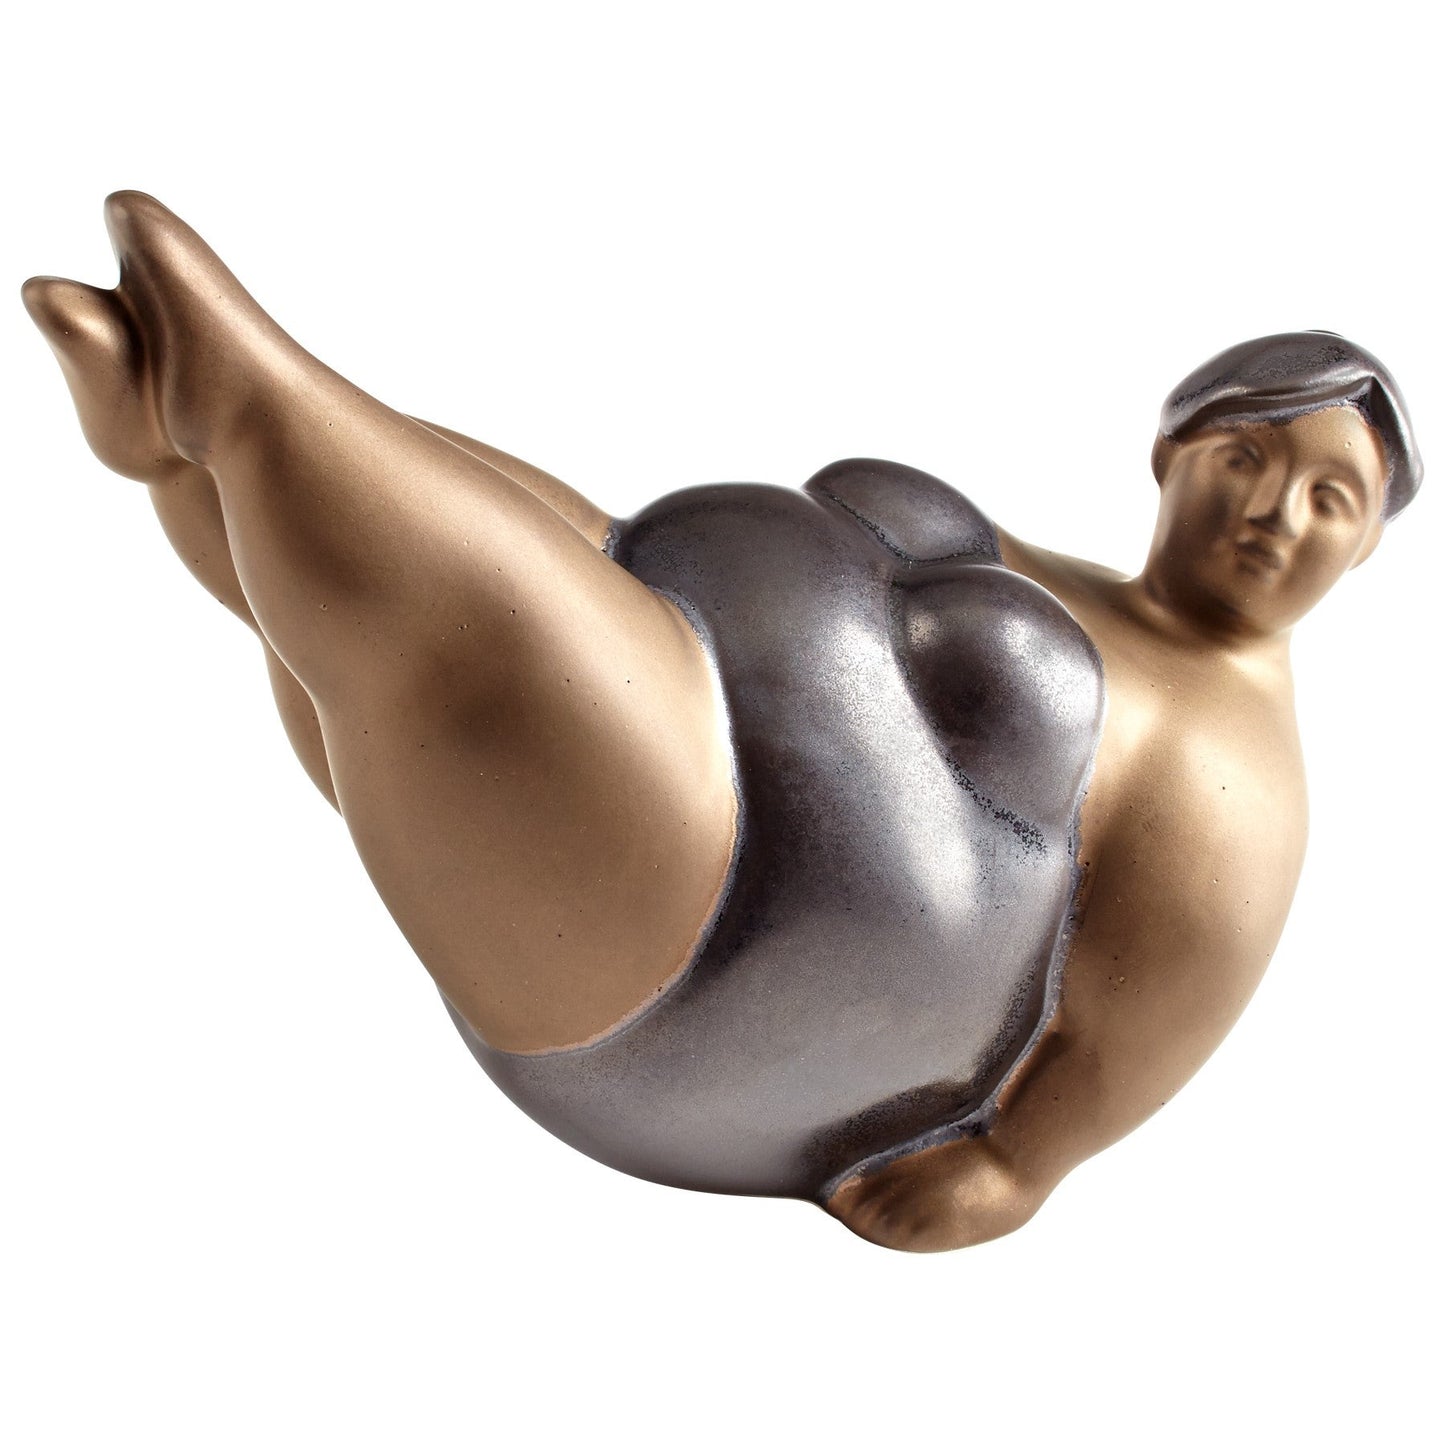 Plus size woman. Painted ceramic. Bronze and black colors. In a yoga pose, modified boat pose. Approximate size: 5.75 inches wide; 4.75 inches tall (to the point of her feet